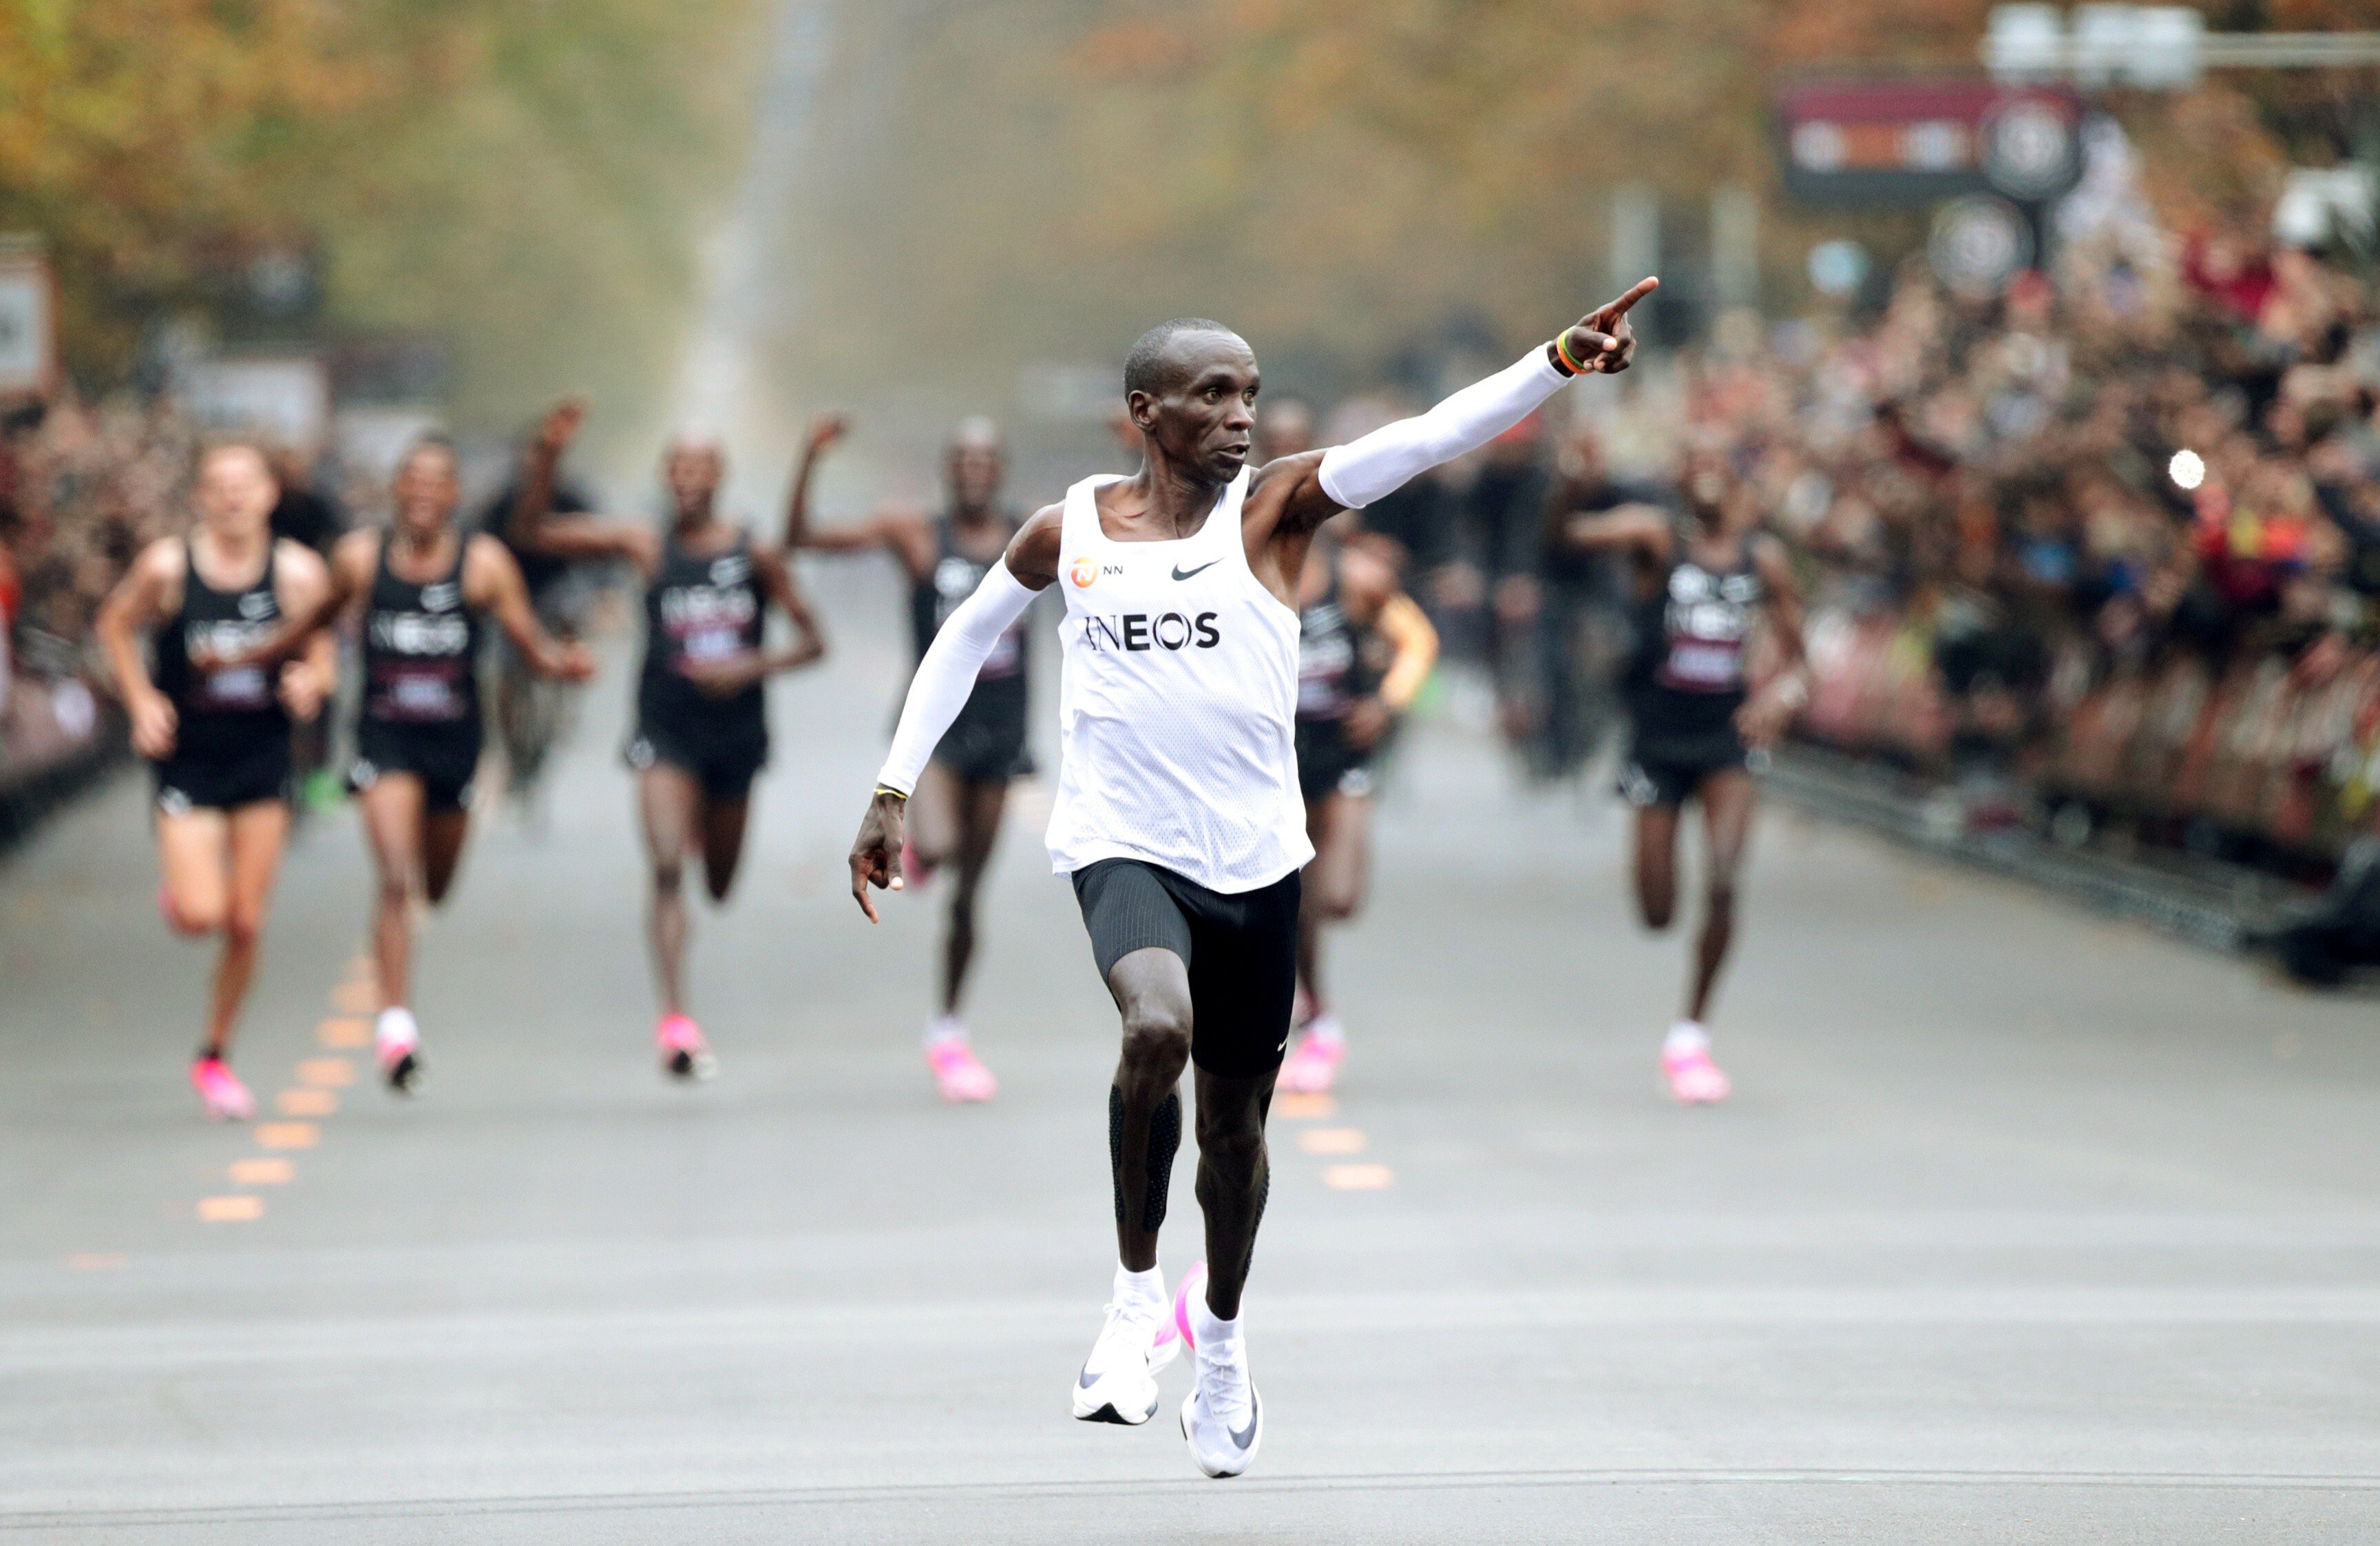 Eliud Kipchoge is the first person to run a marathon distance in under two hours. Adharanand Finn explores the factors that produce so many great runners from Kenya in his book Running with the Kenyans. Photo: Reuters